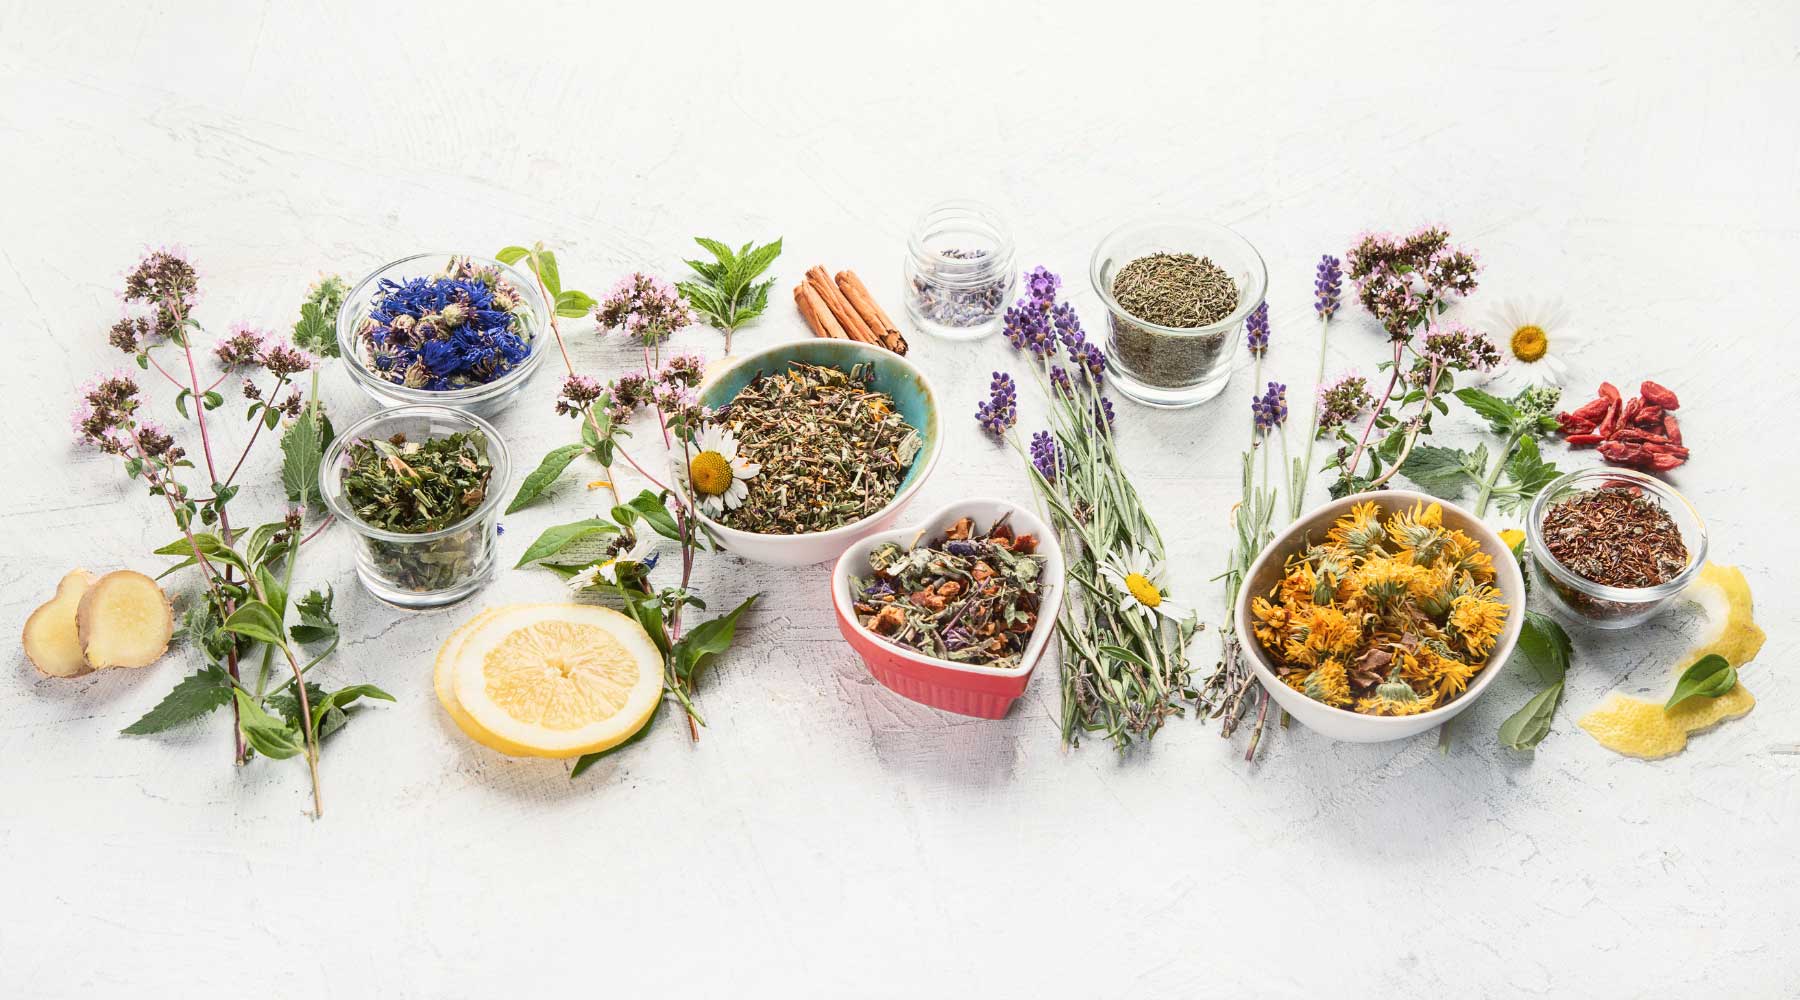 Dried herbs flowers and leaves for herbal tea rose peppermint thyme marigold lavender chamomile oregano